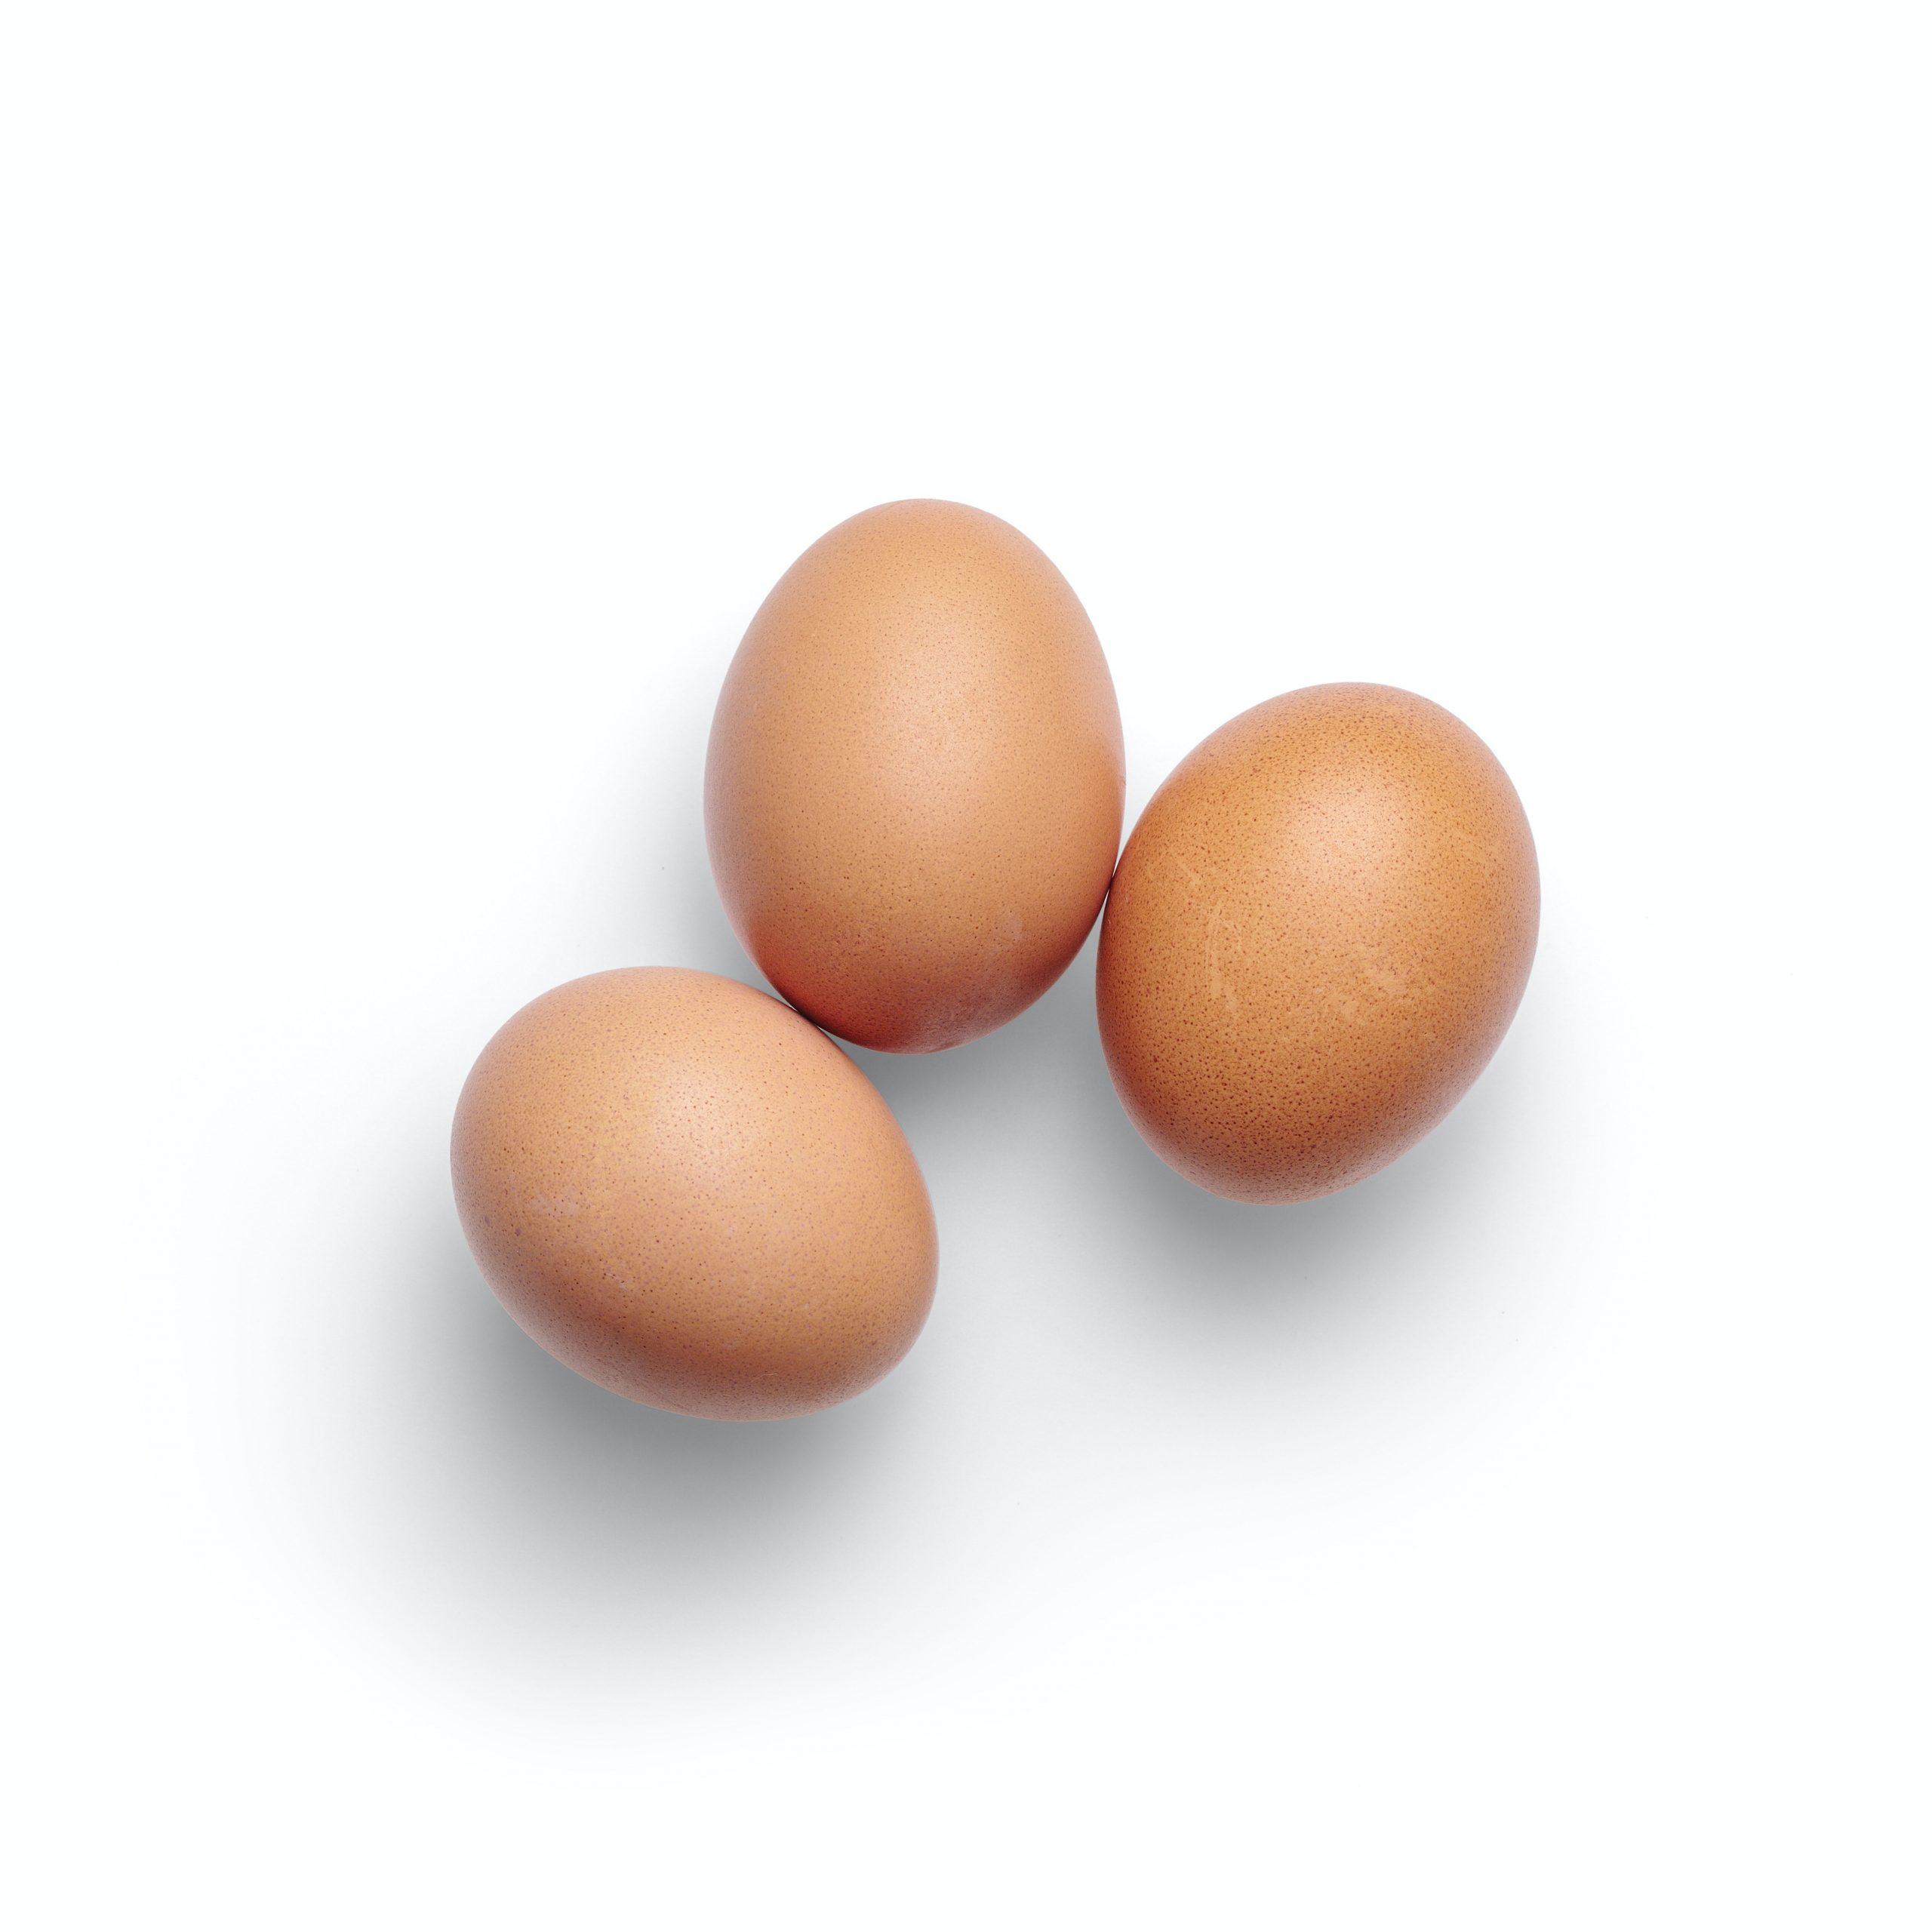 Which%20of%20these%20vitamins%20will%20you%20not%20find%20in%20eggs%3F